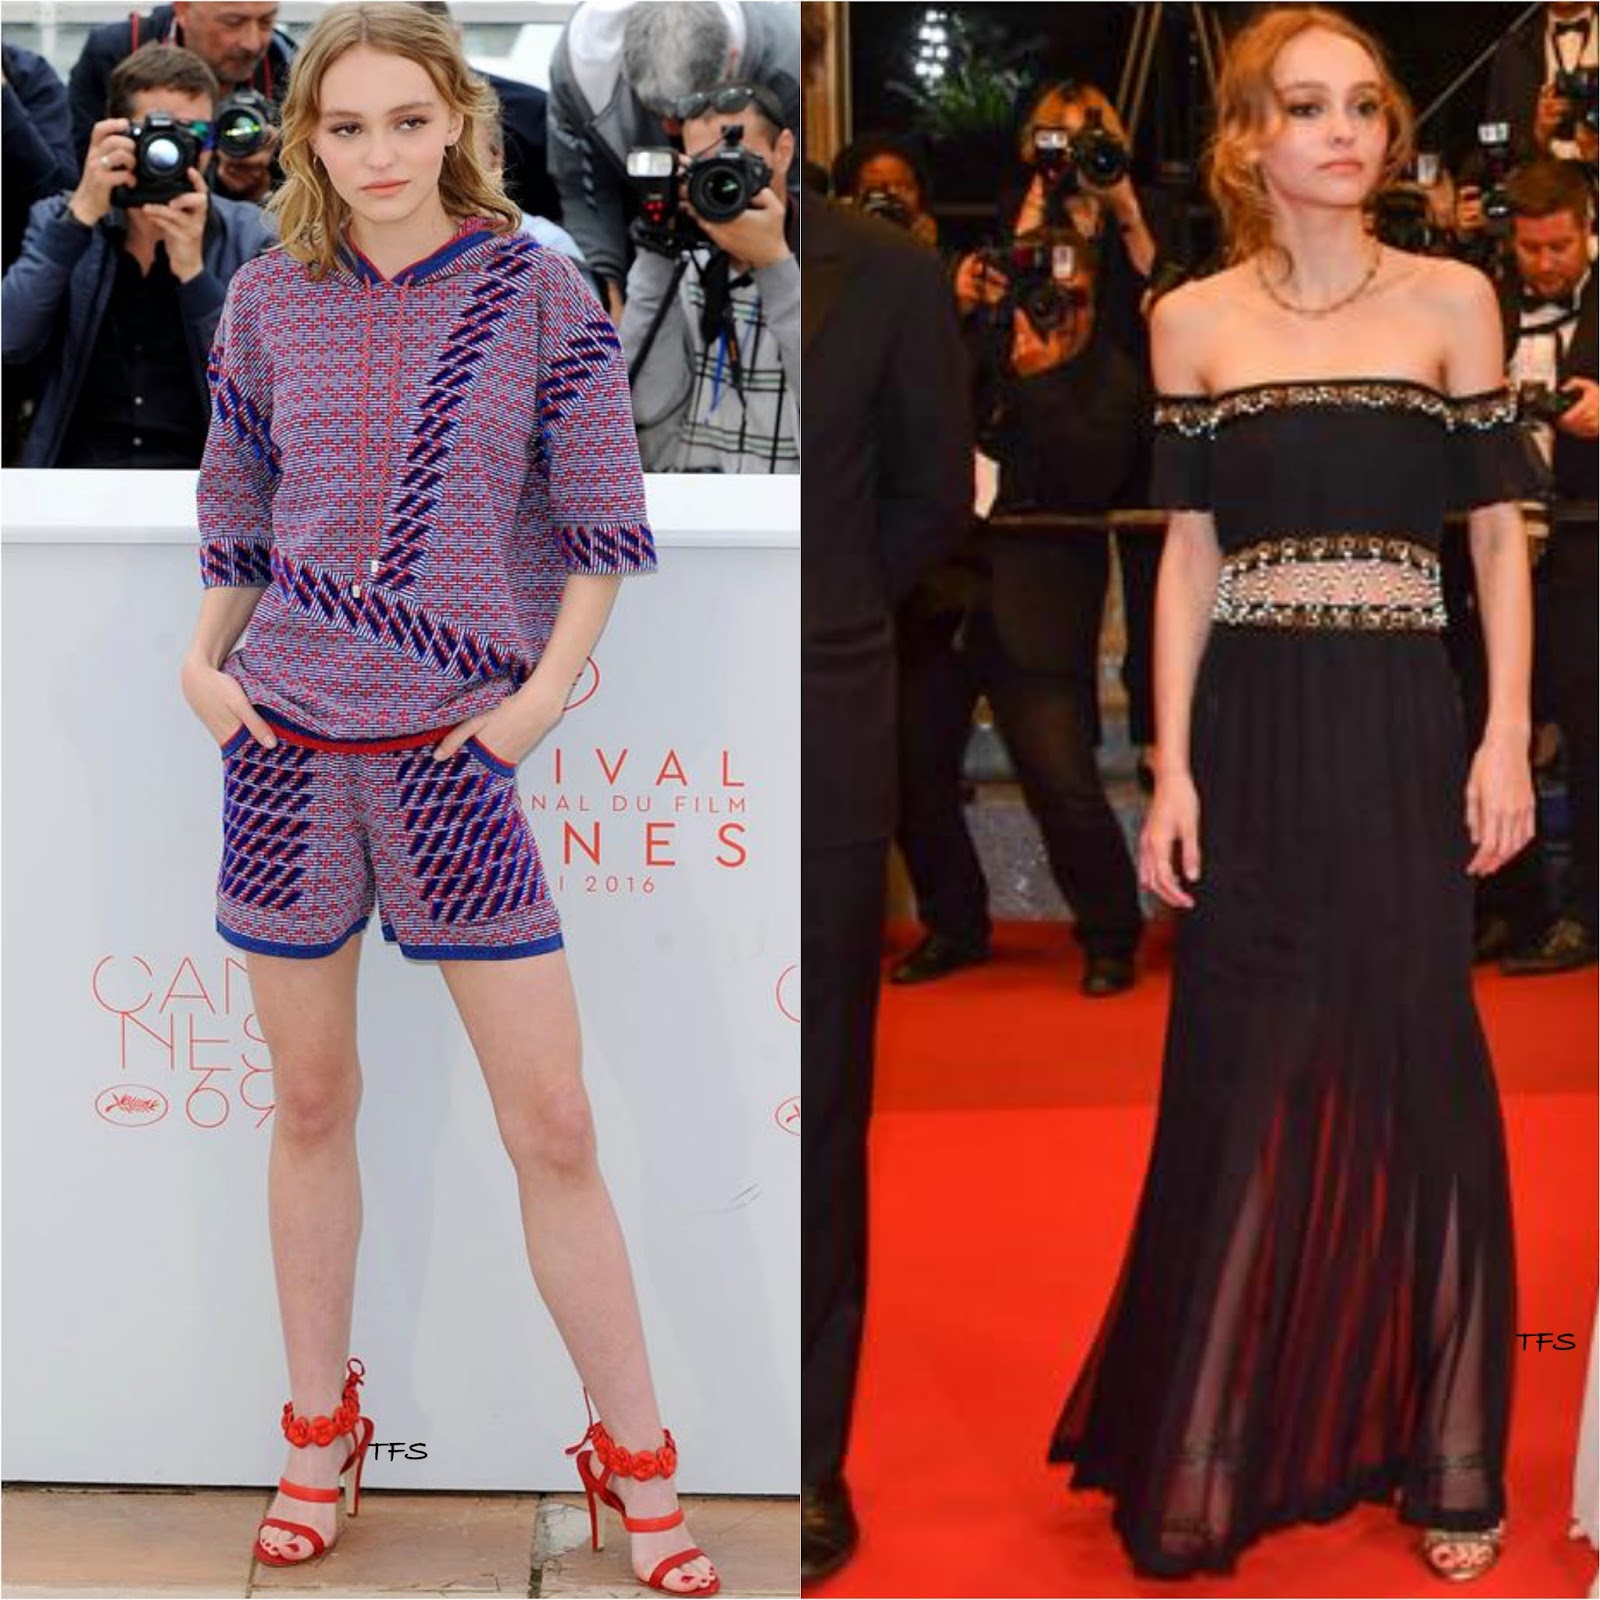 Young Muse Lily-Rose Depp Shines in Chanel at Cannes: A Glance at